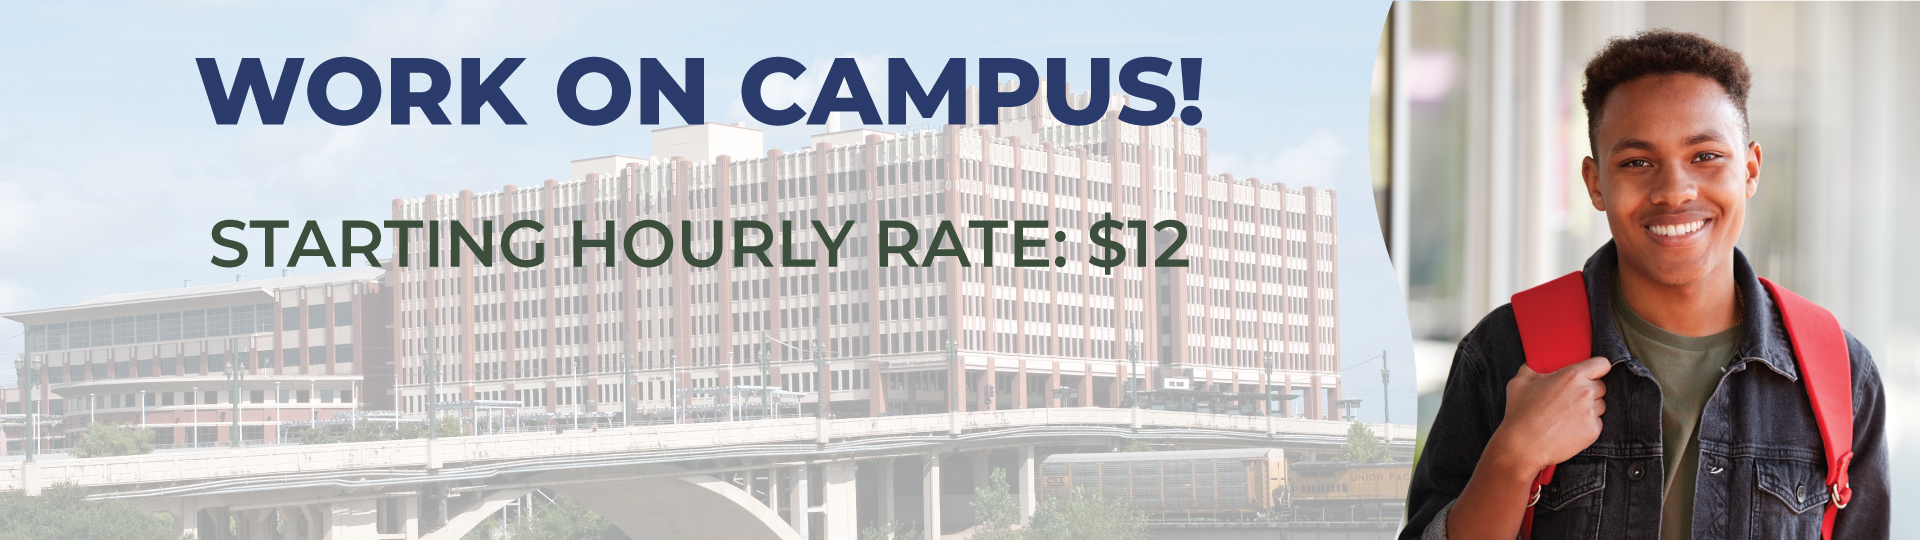 Work on Campus! Satrrting Hourly Rate:$12